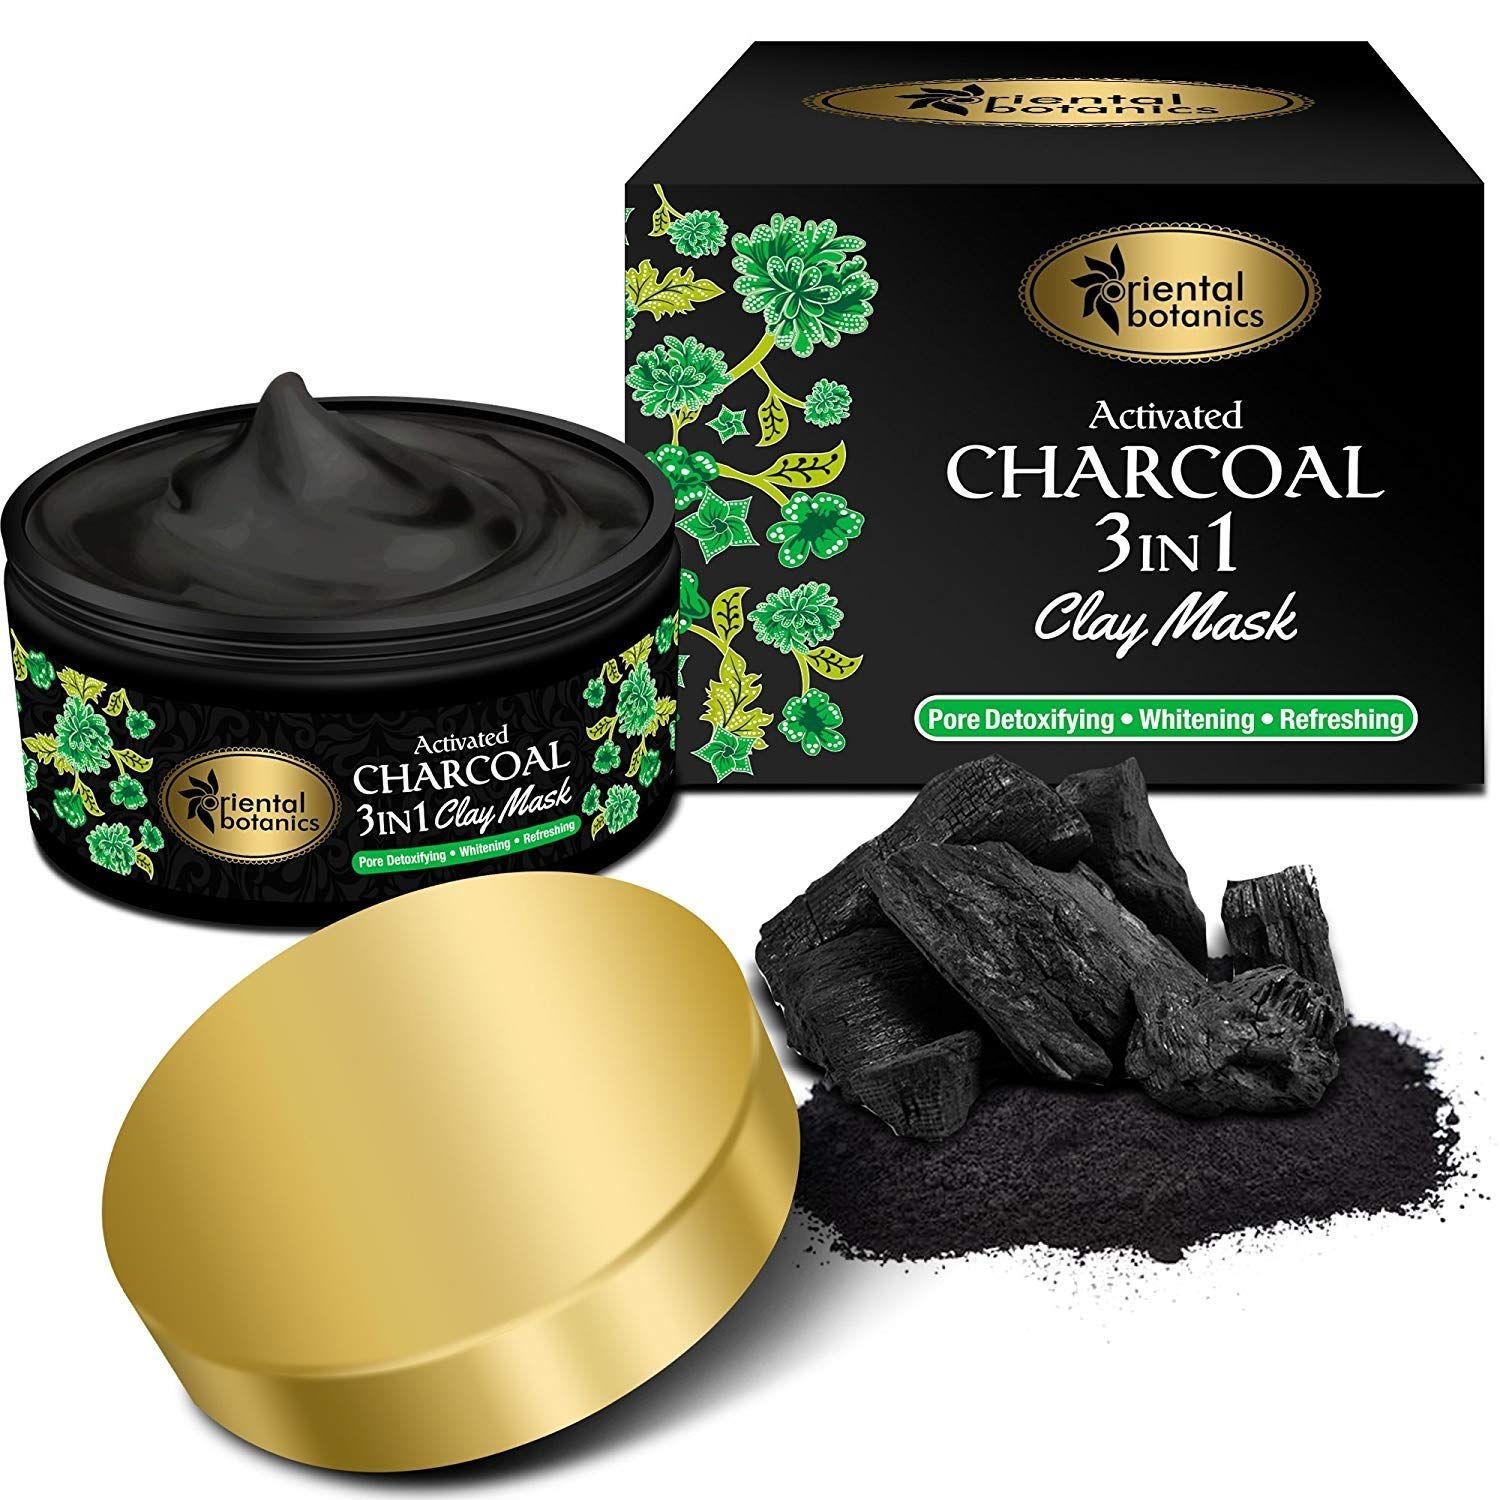 Buy Oriental Botanics Activated Charcoal 3 IN 1 Clay Mask (100 g) - Purplle